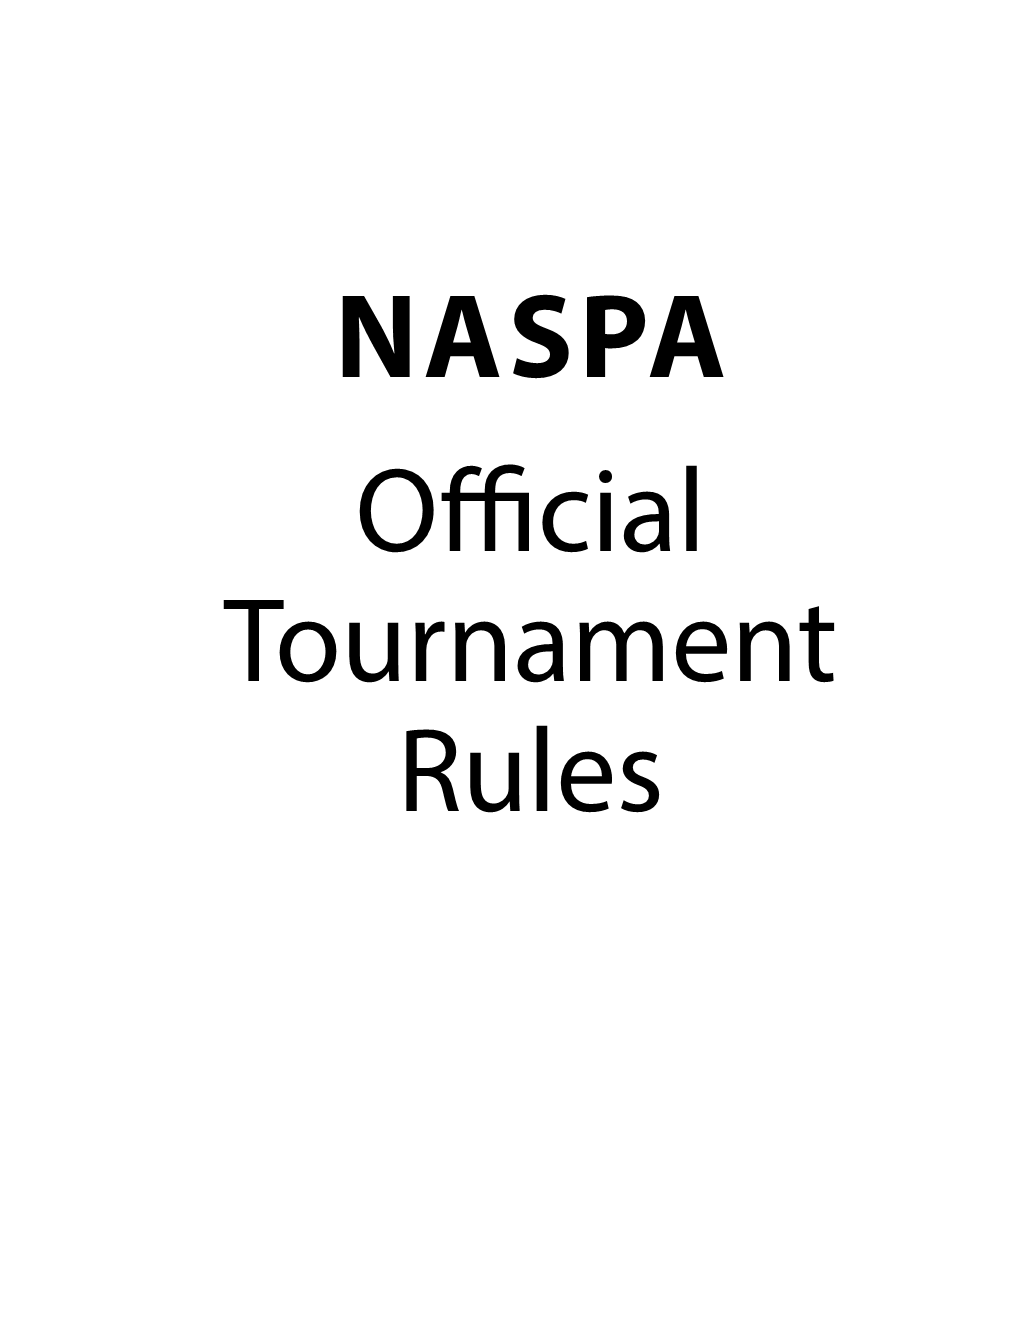 NASPA Official Tournament Rules